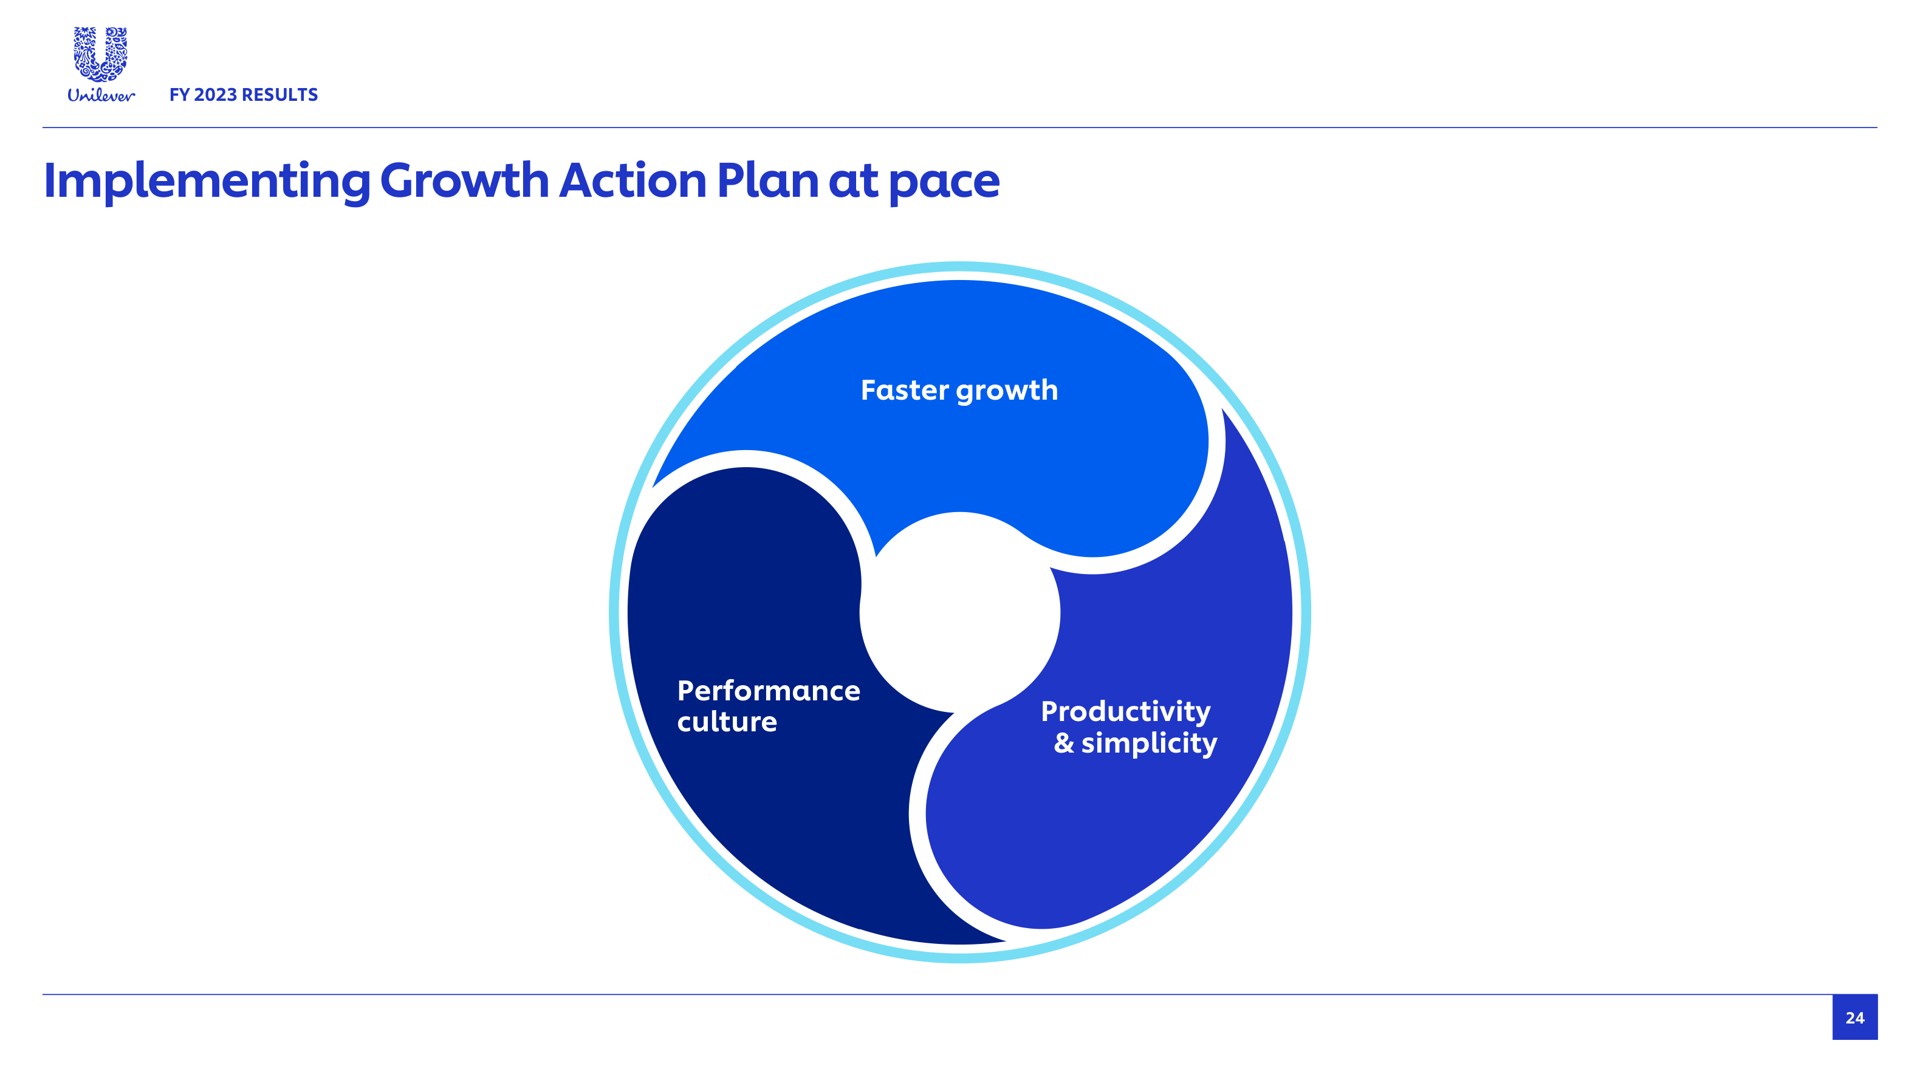 implementing growth action plan at pace of faster performance culture simplicity | Unilever